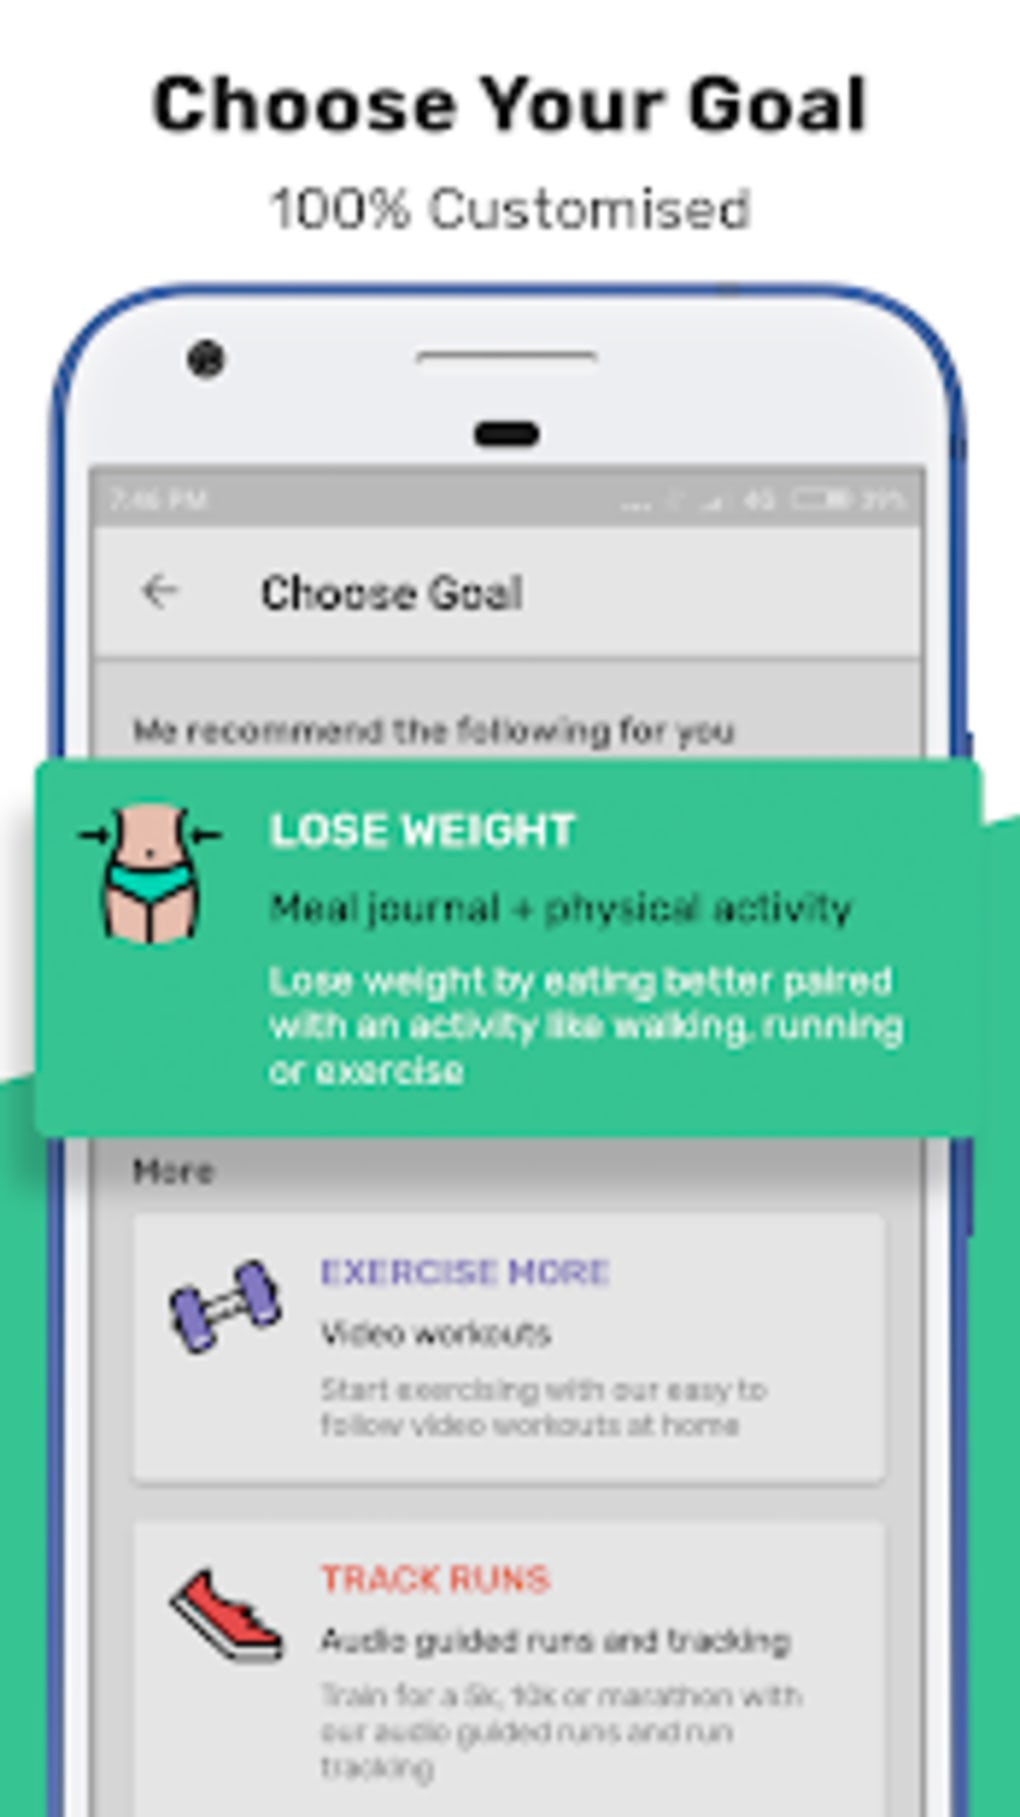 Can jogging help you lose weight? - Helsana